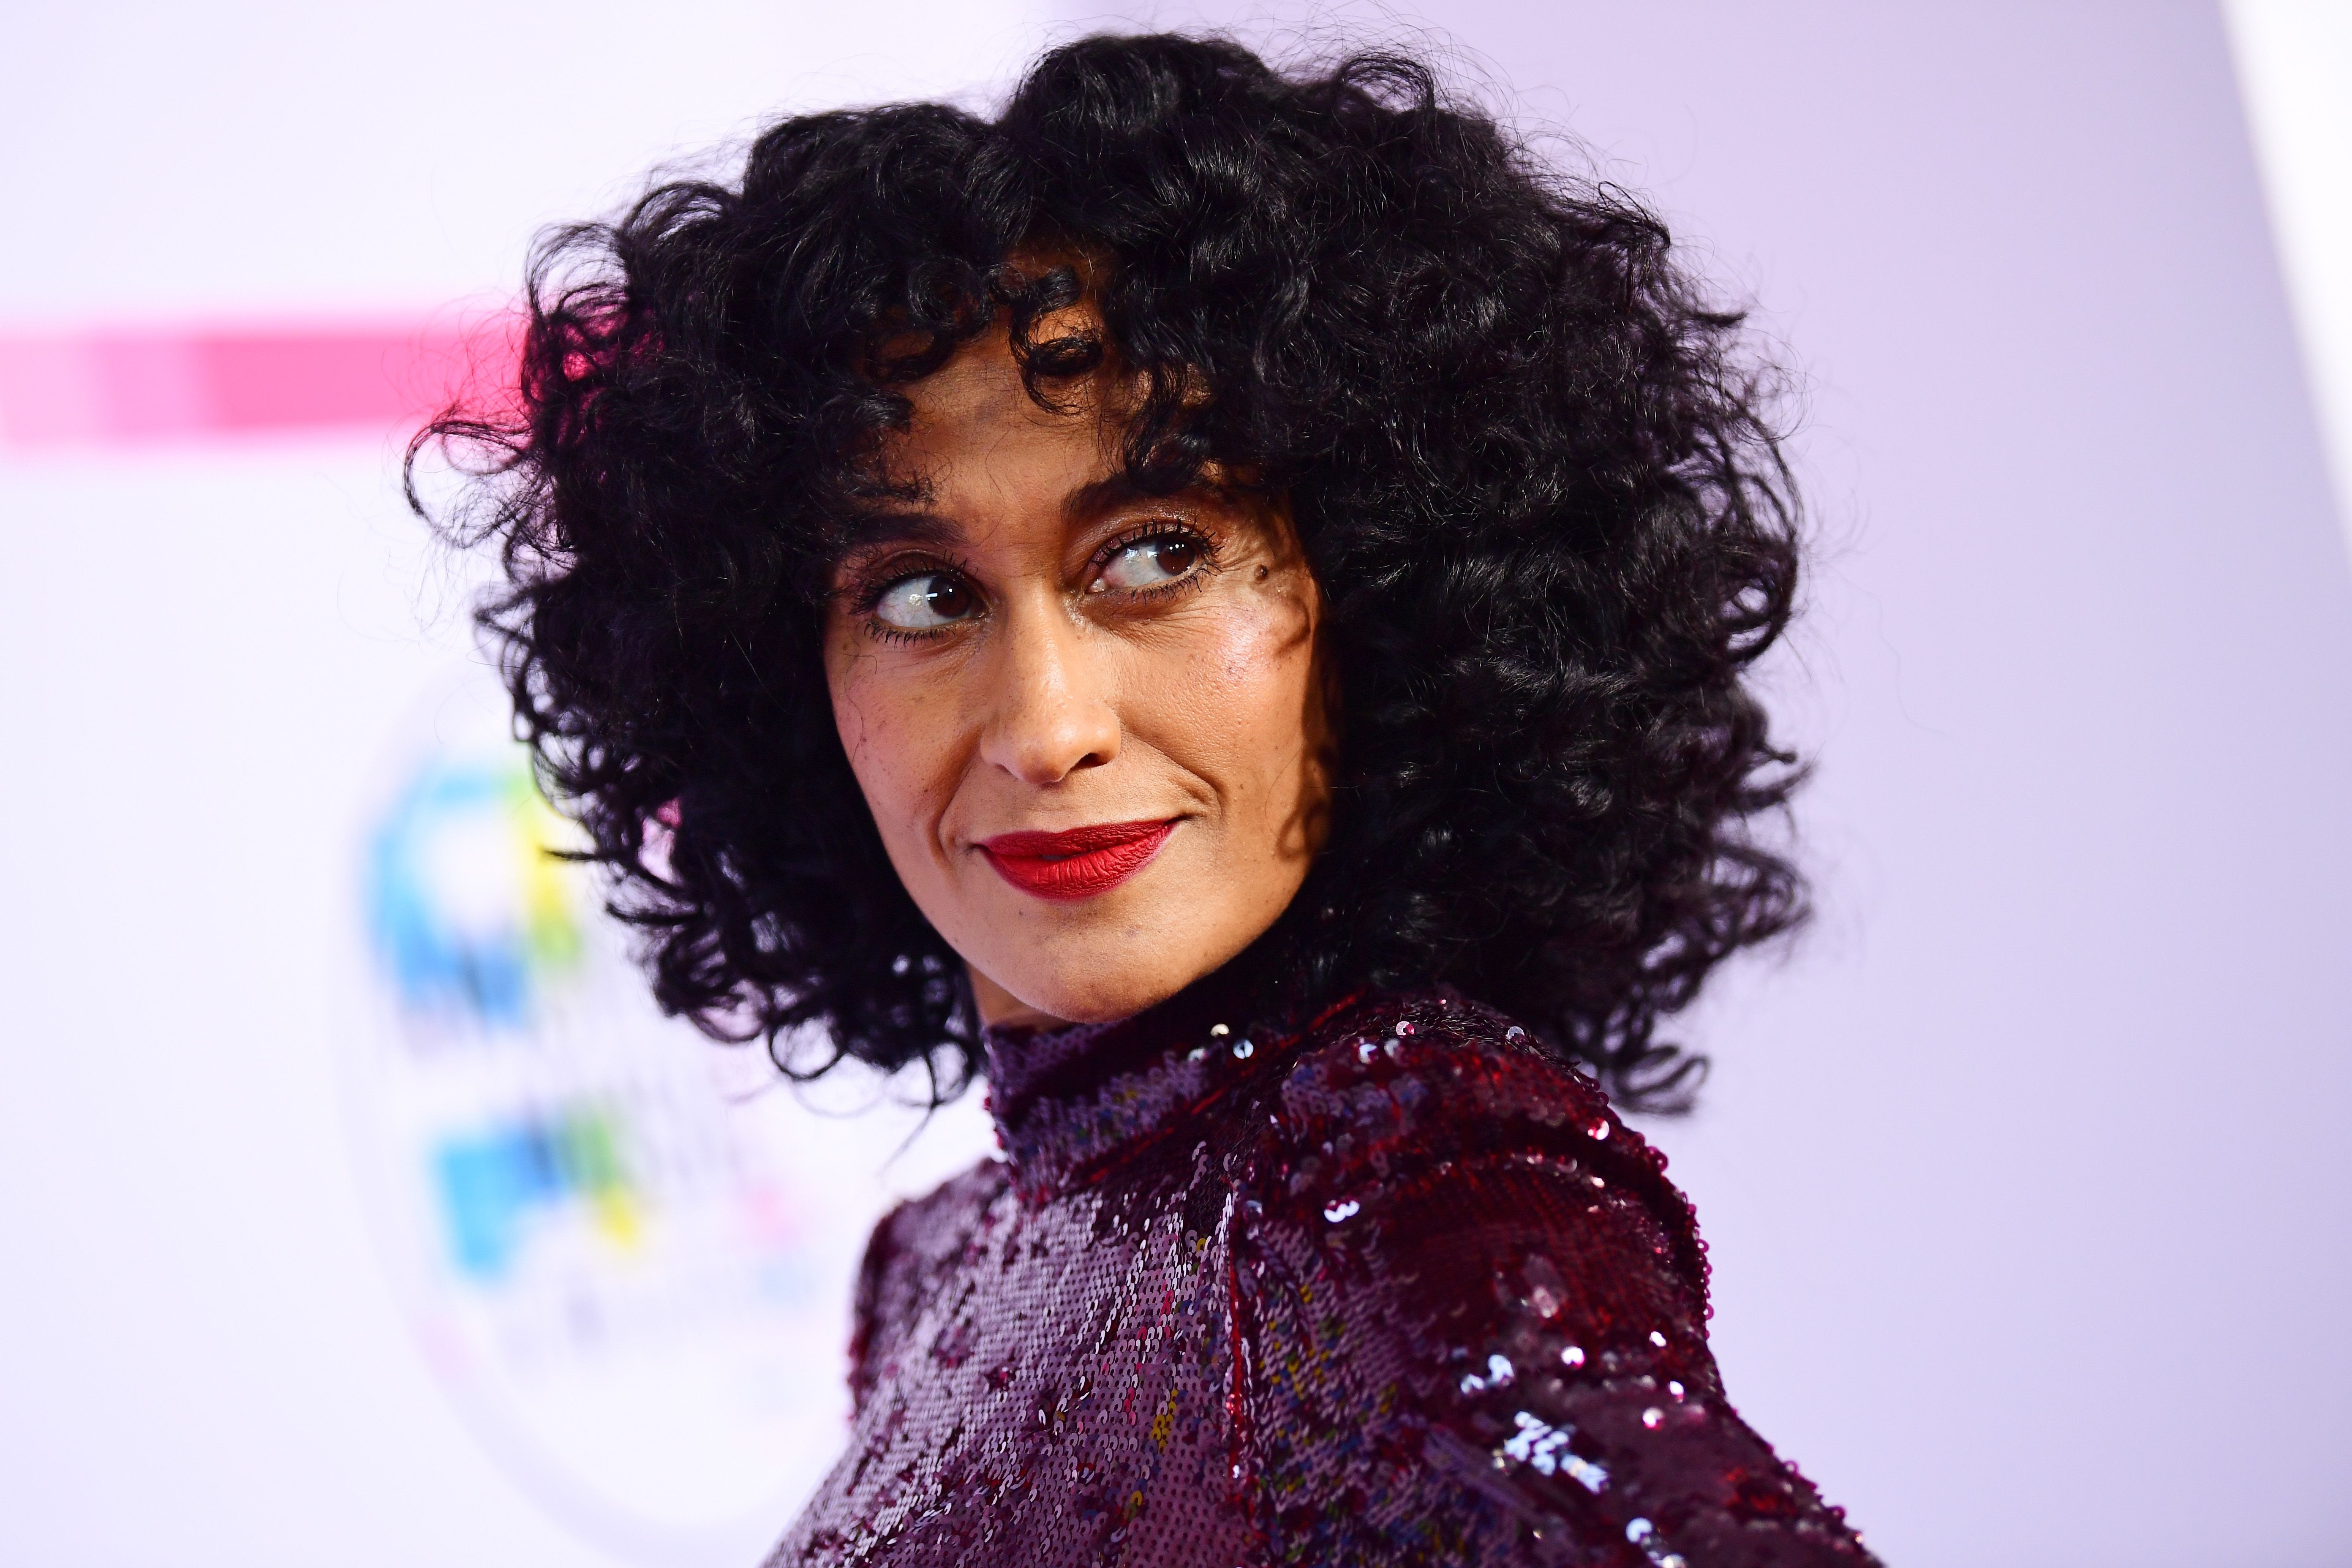 Tracee Ellis Ross at the 2017 American Music Awards at Microsoft Theater on November 19, 2017 in Los Angeles, California. | Photo: Getty Images